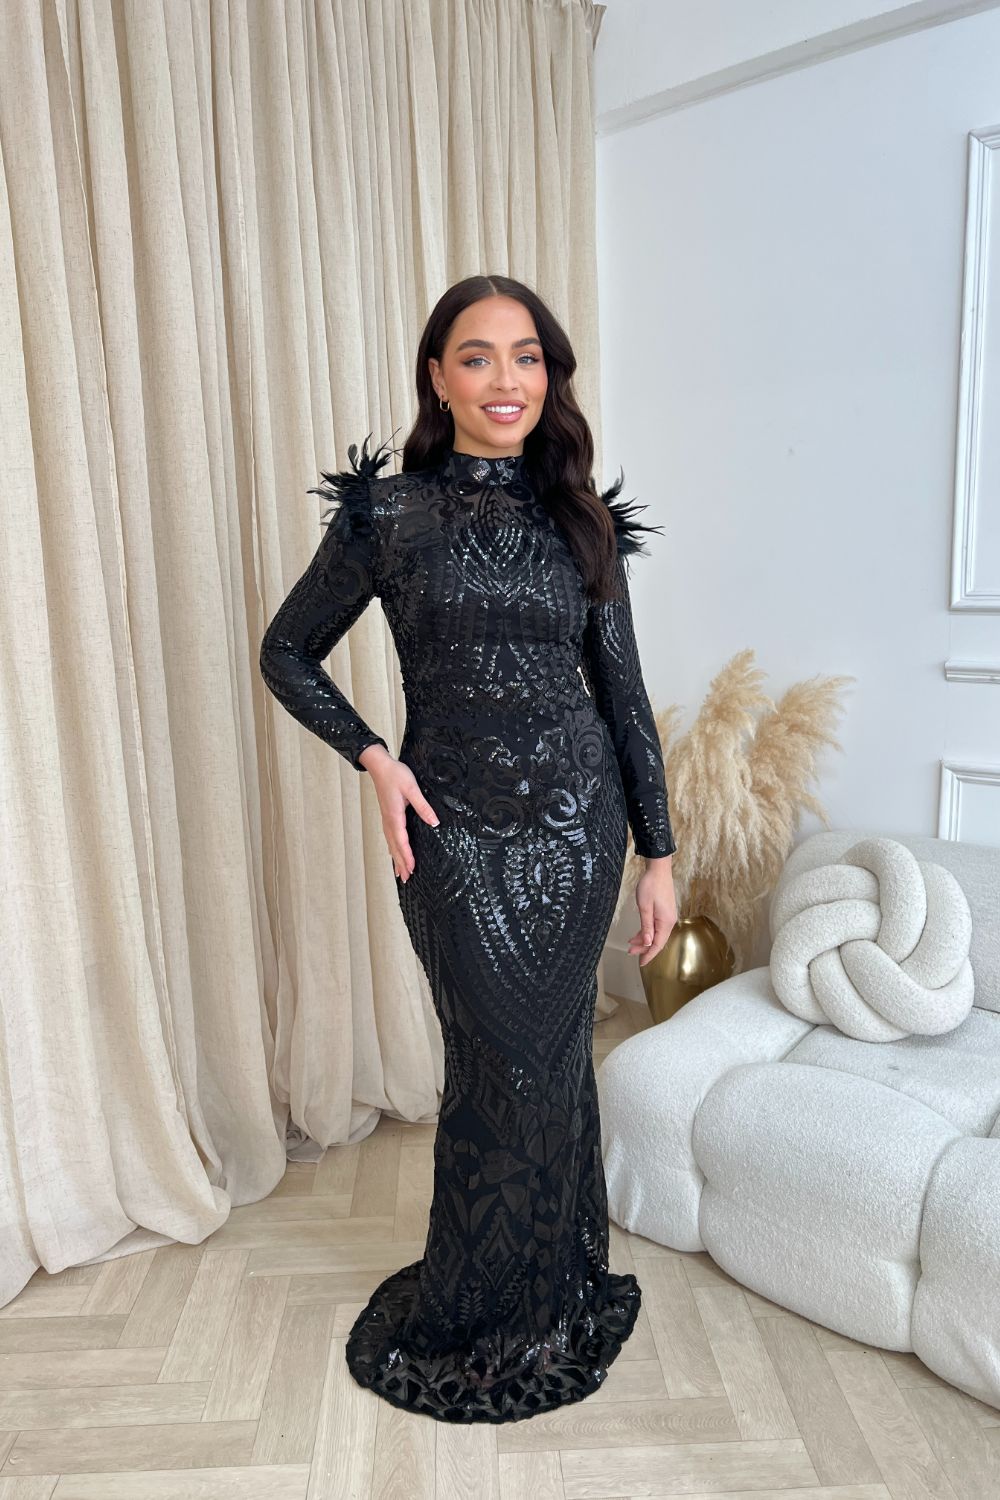 Saint Black Luxe Sequin Embellished Hourglass Illusion Long Sleeve Feather Maxi Dress